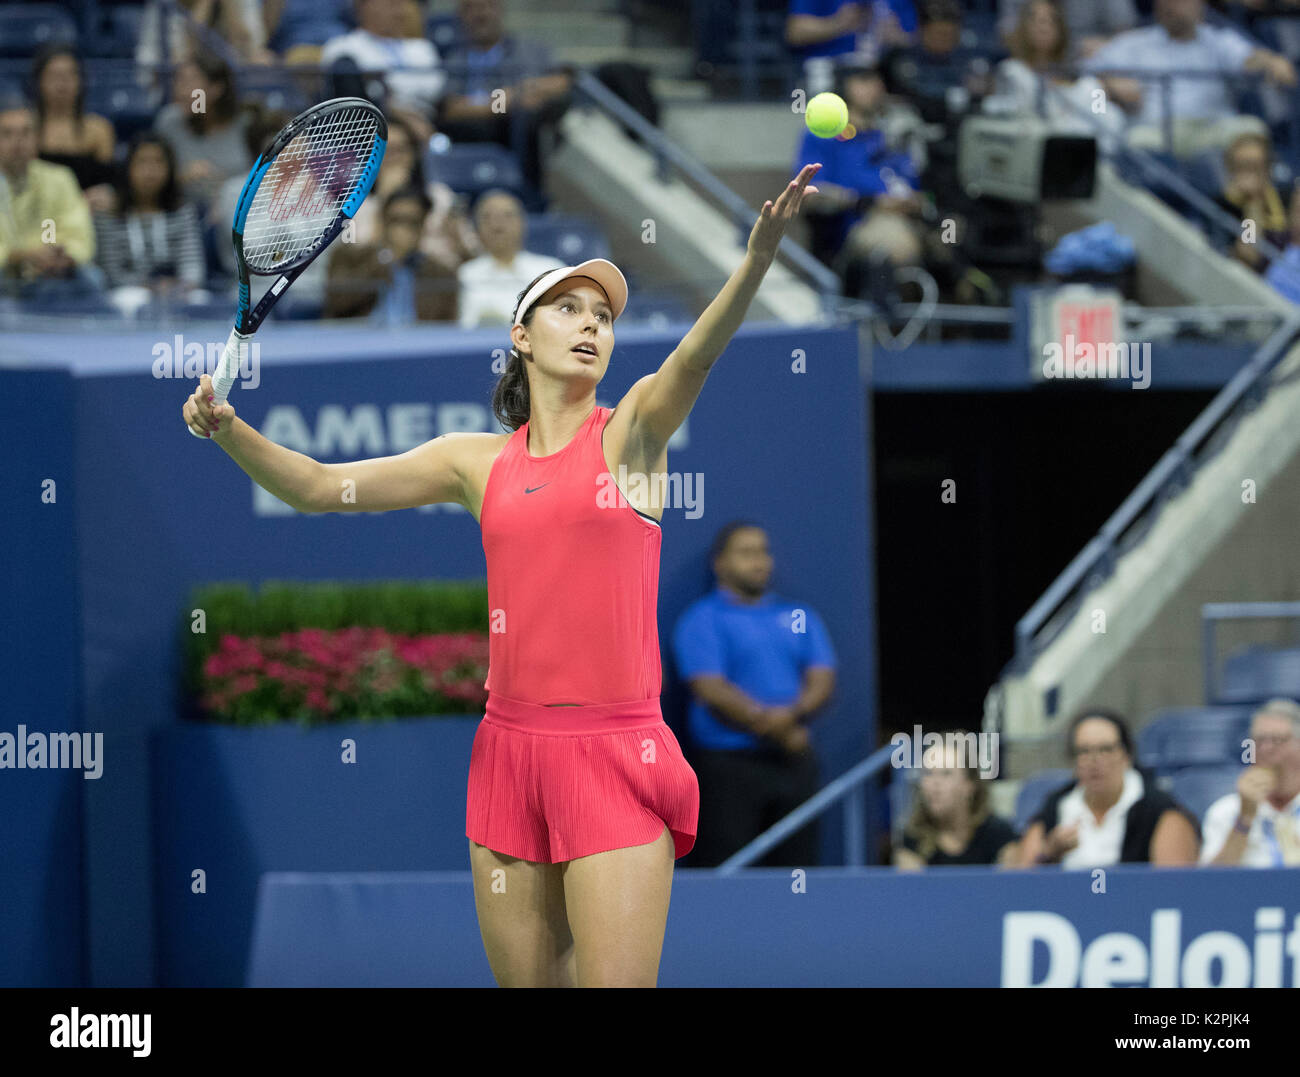 New York, United States. 30th Aug, 2017. New York, NY USA - August 30, 2017: Oceane Dodin of France serves during match against Venus Williams of USA at US Open Championships at Billie Jean King National Tennis Center Credit: lev radin/Alamy Live News Stock Photo